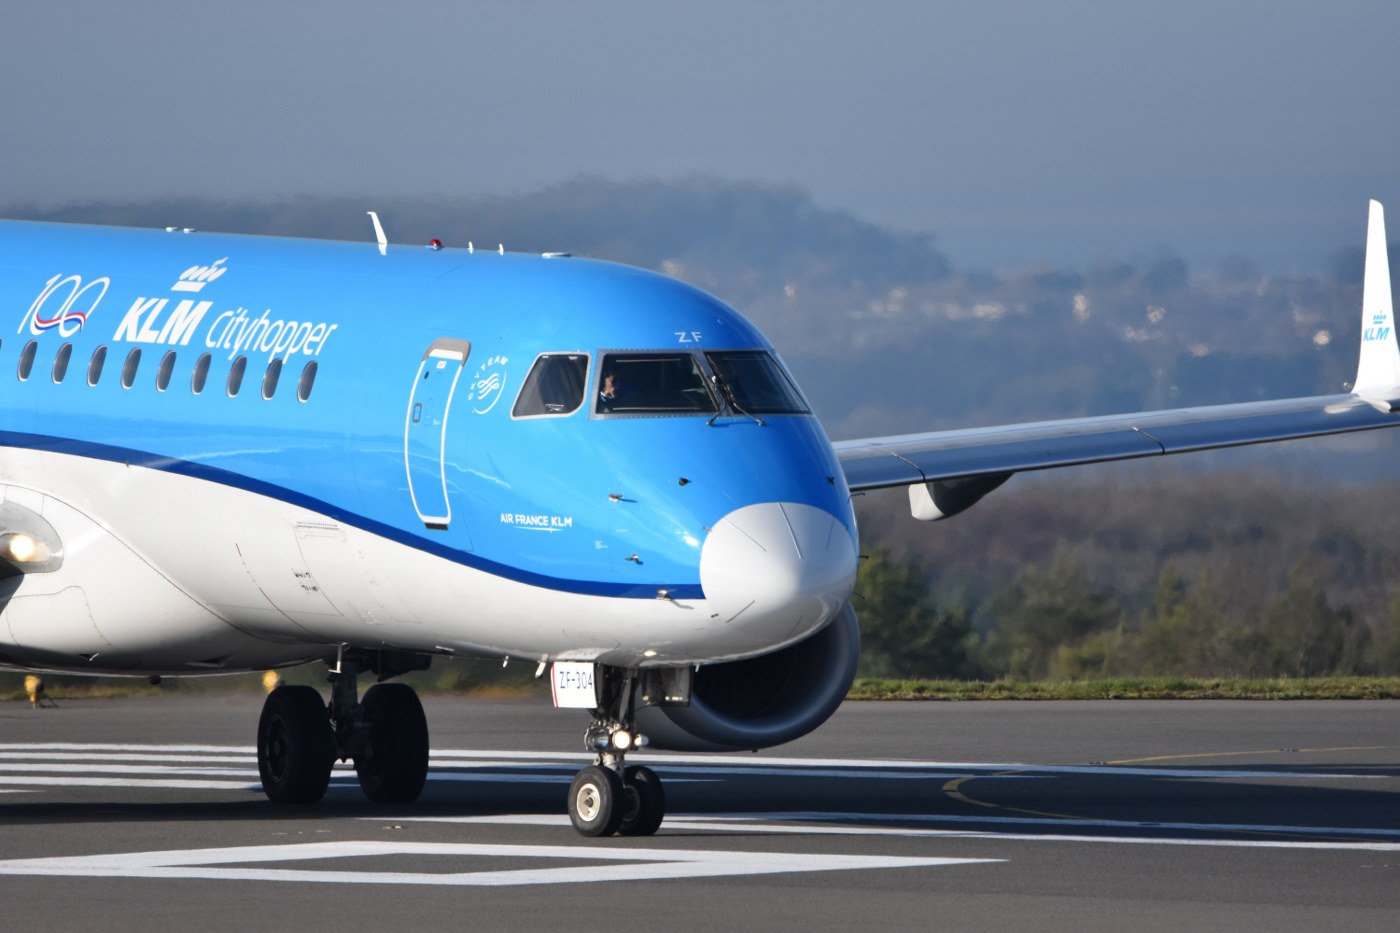 KLM green airline in Europe